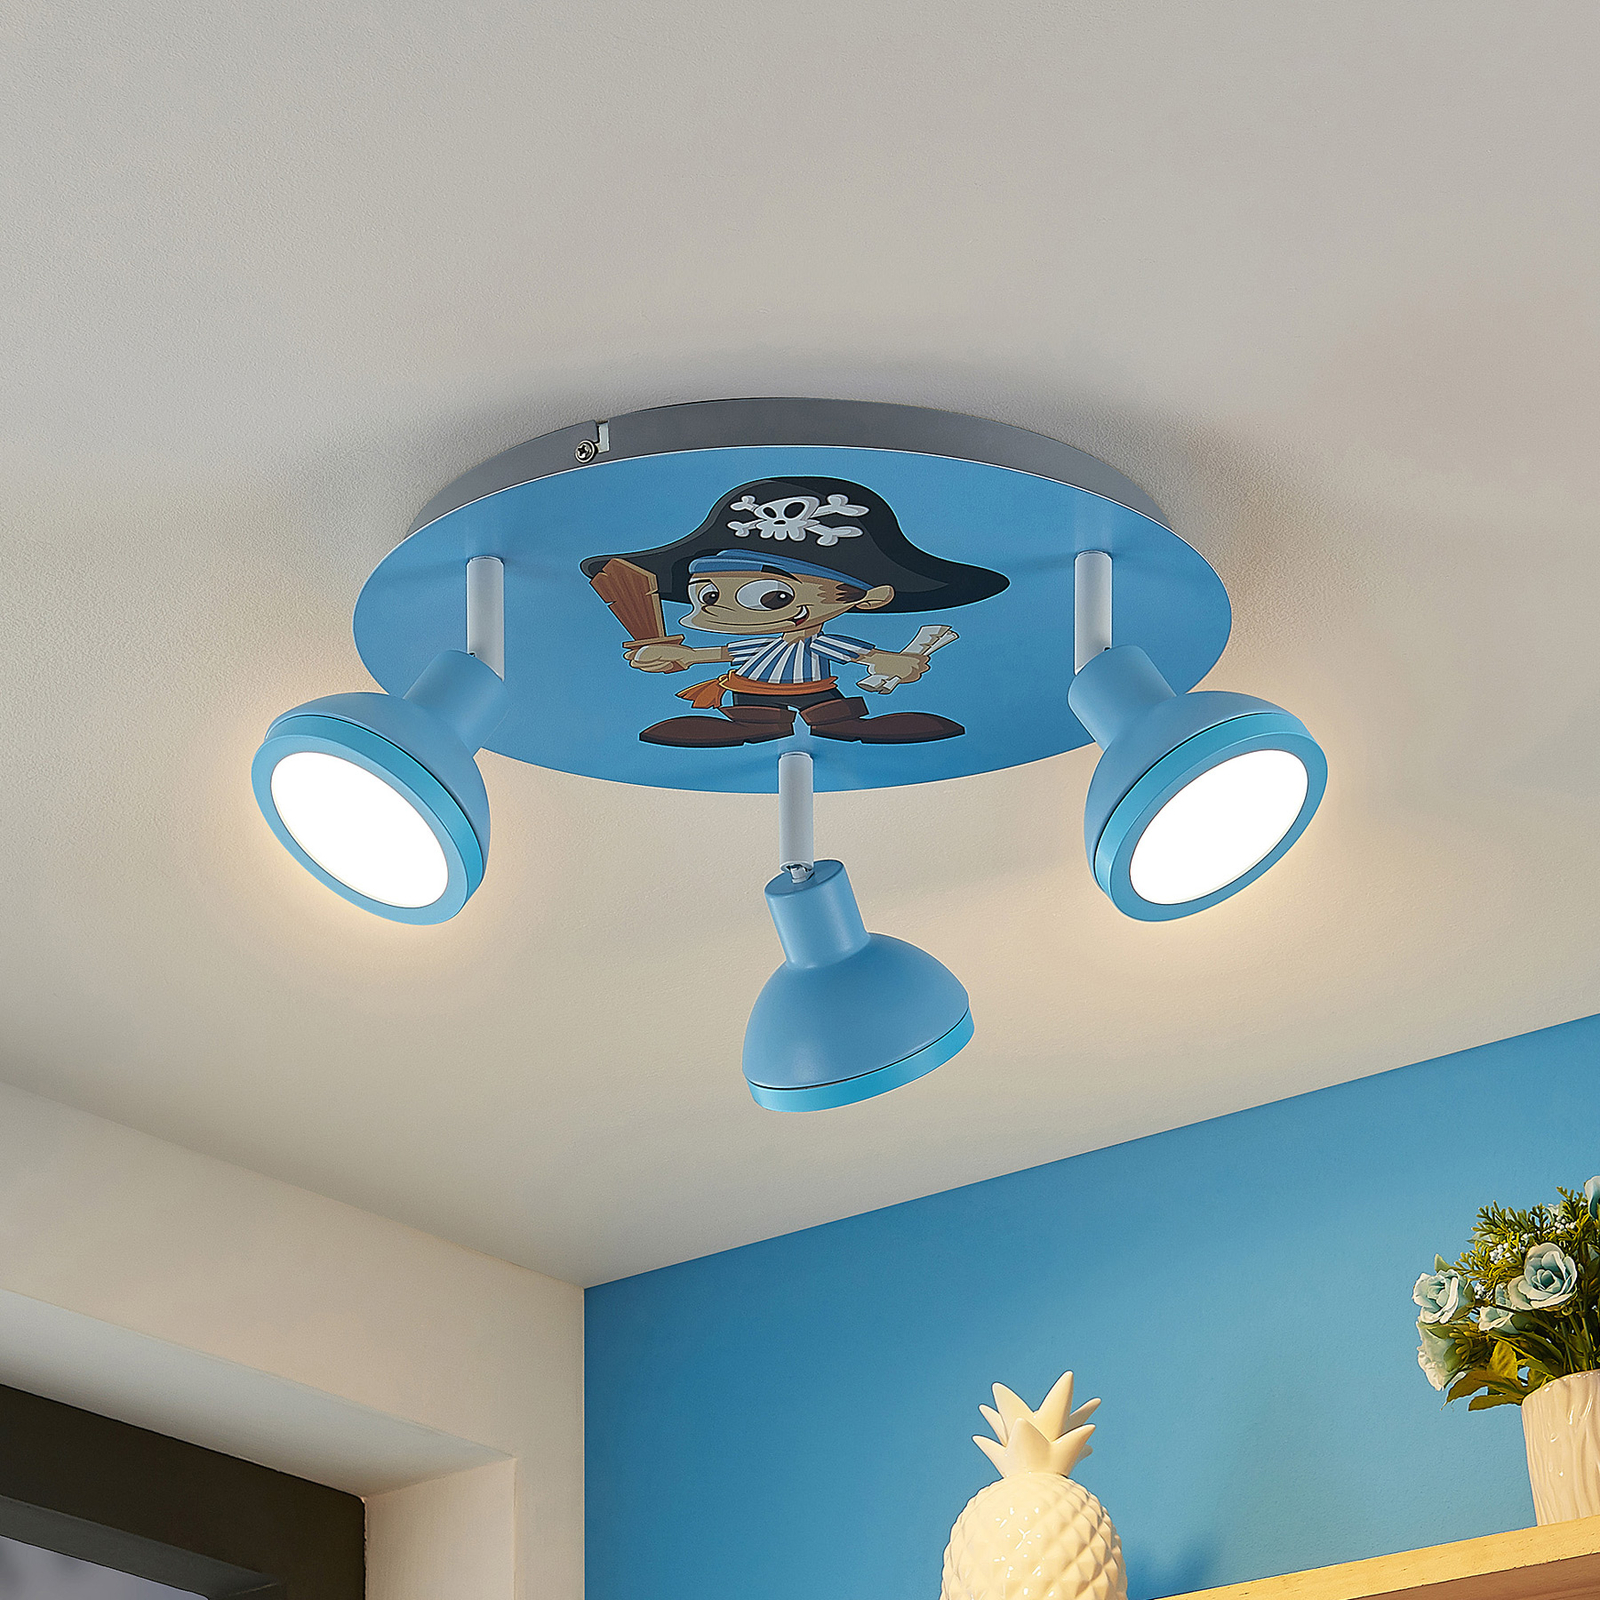 Lindby Roxas children's ceiling light, Pirate